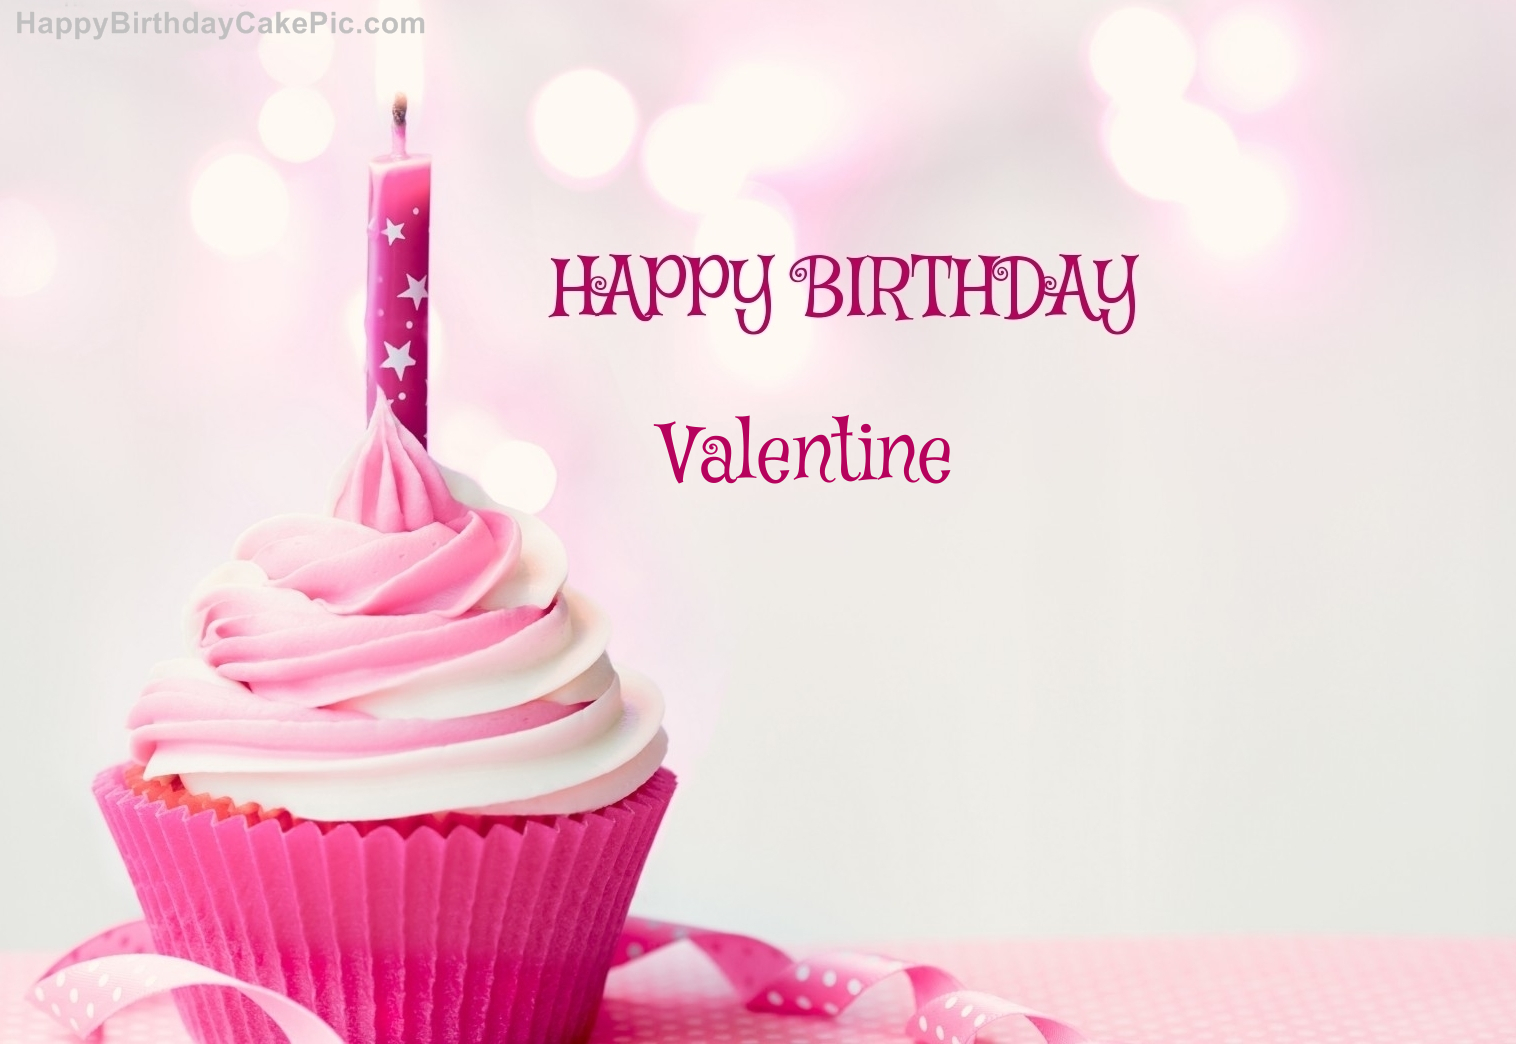 Happy Birthday Cupcake Candle Pink Cake For Valentine